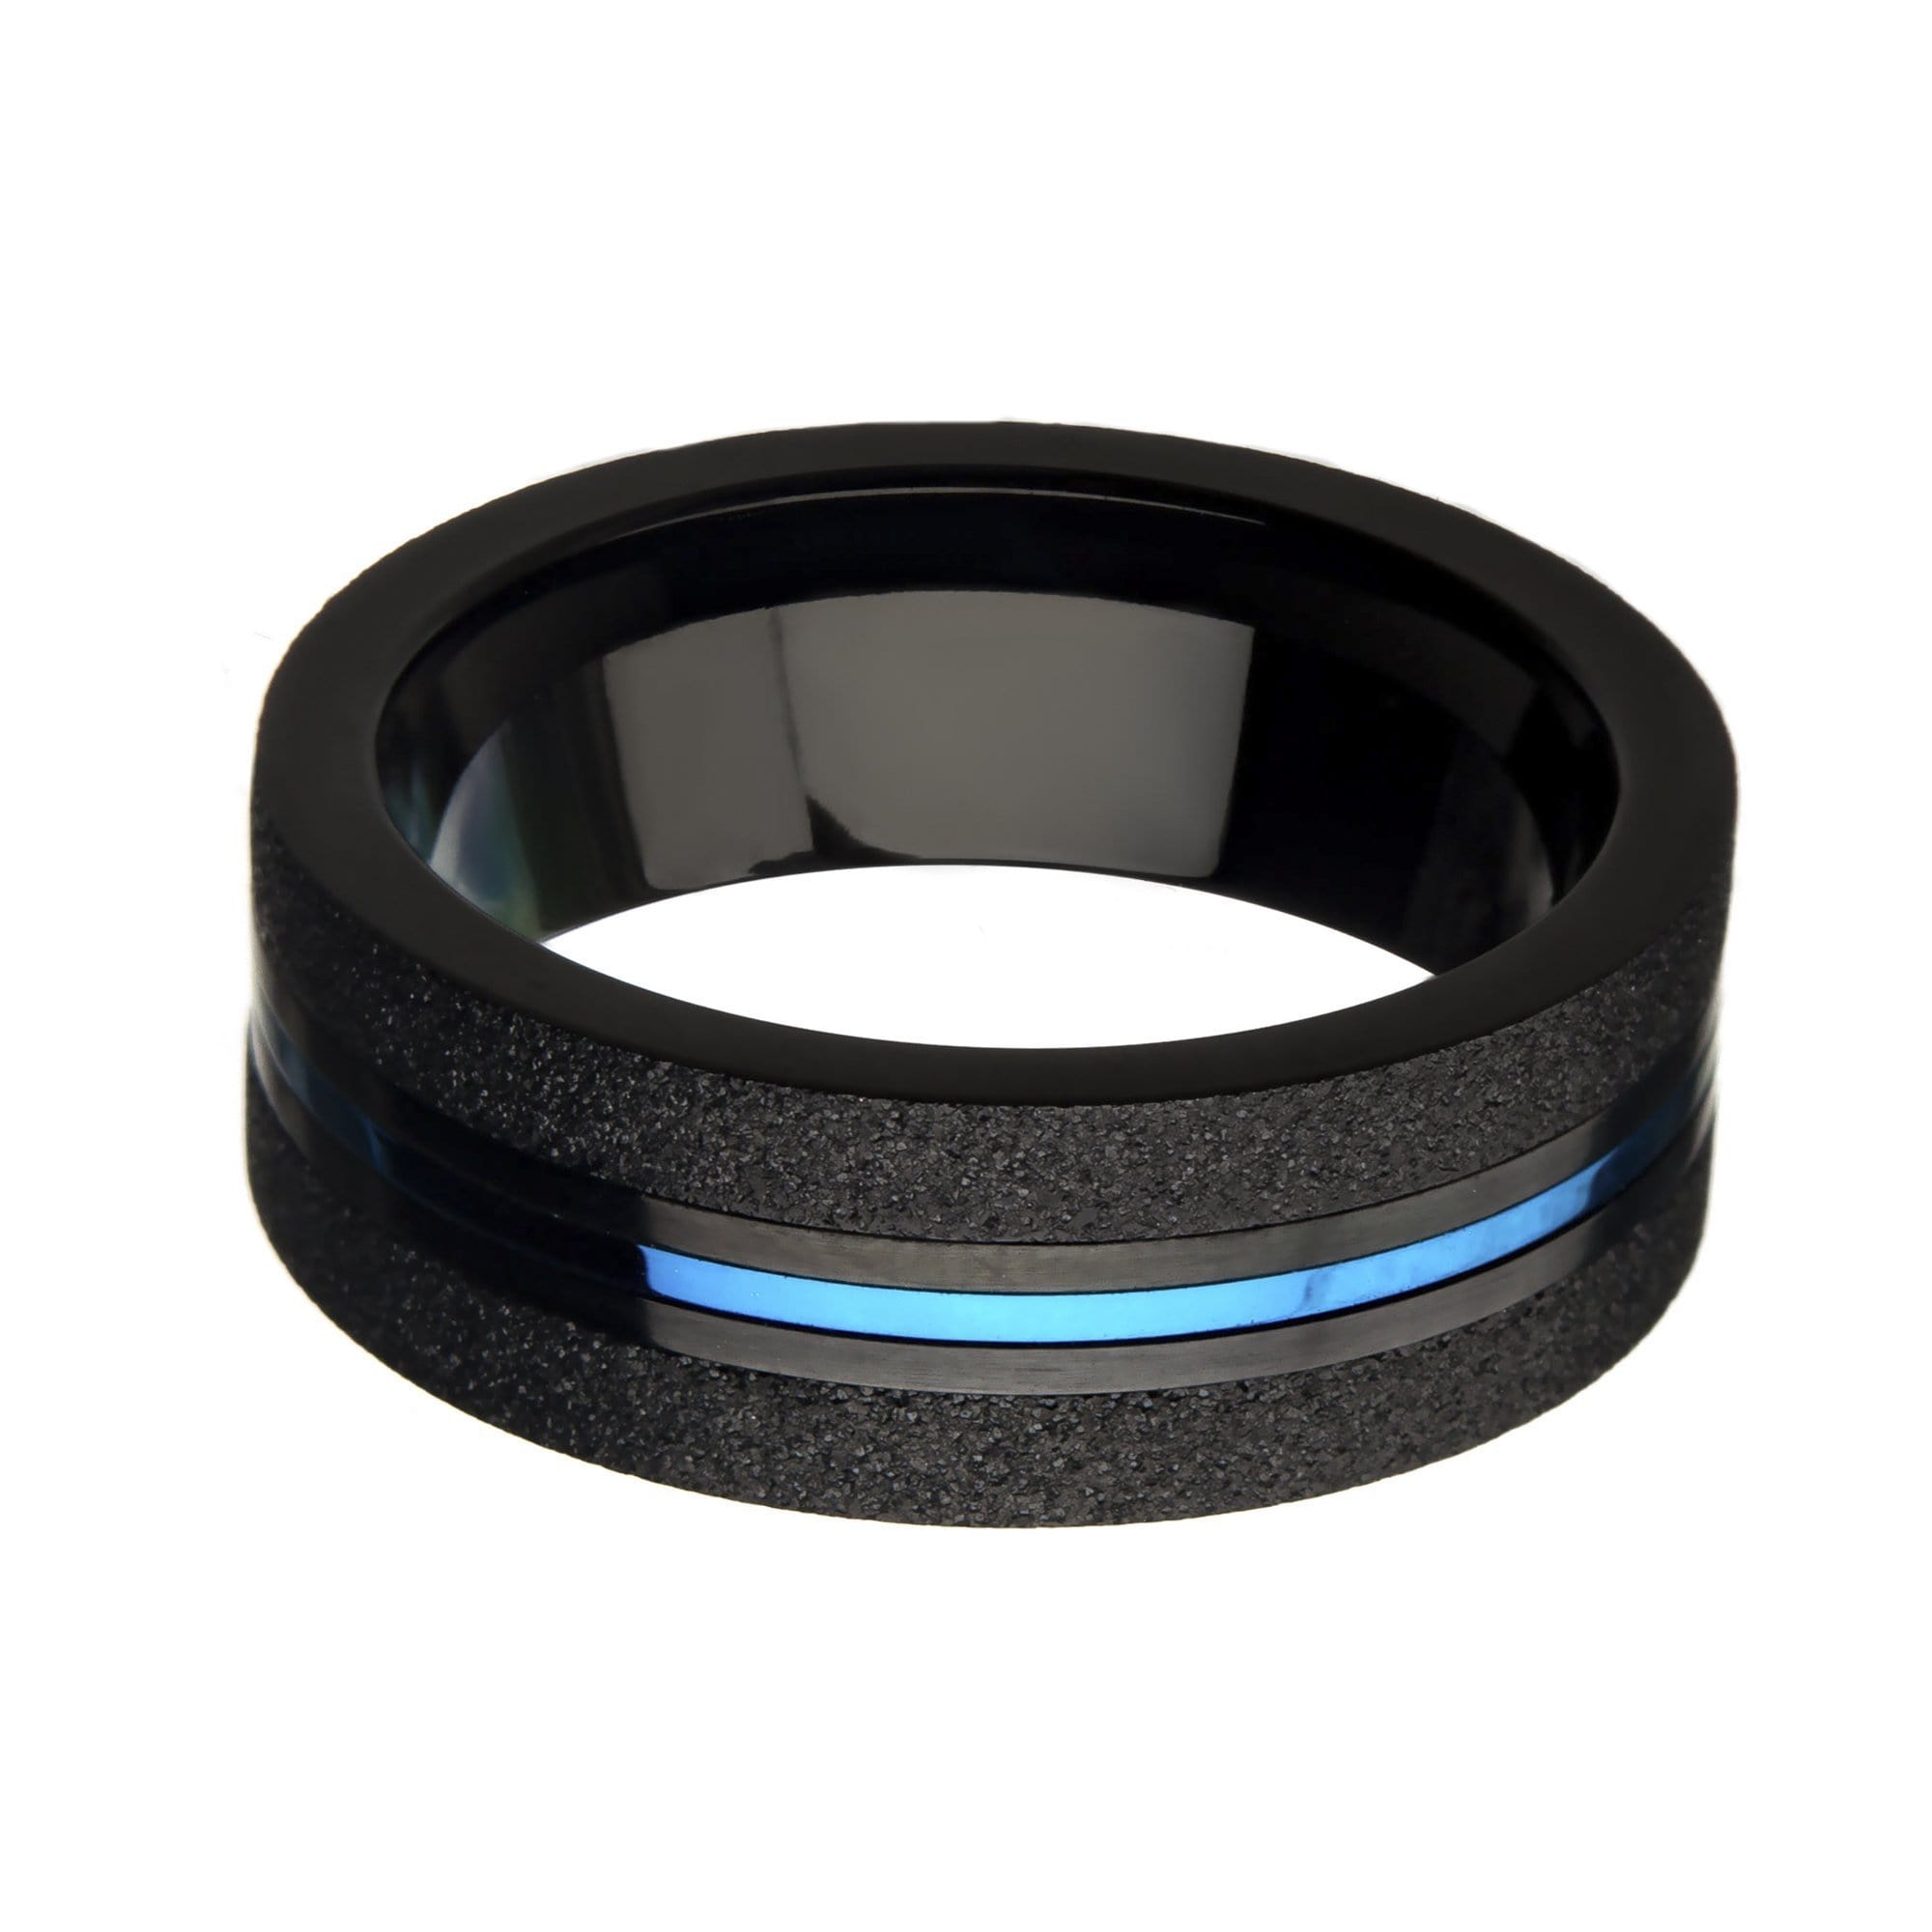 INOX JEWELRY Rings Blue and Black Stainless Steel Brushed Finish Clean Line Urban Band Ring